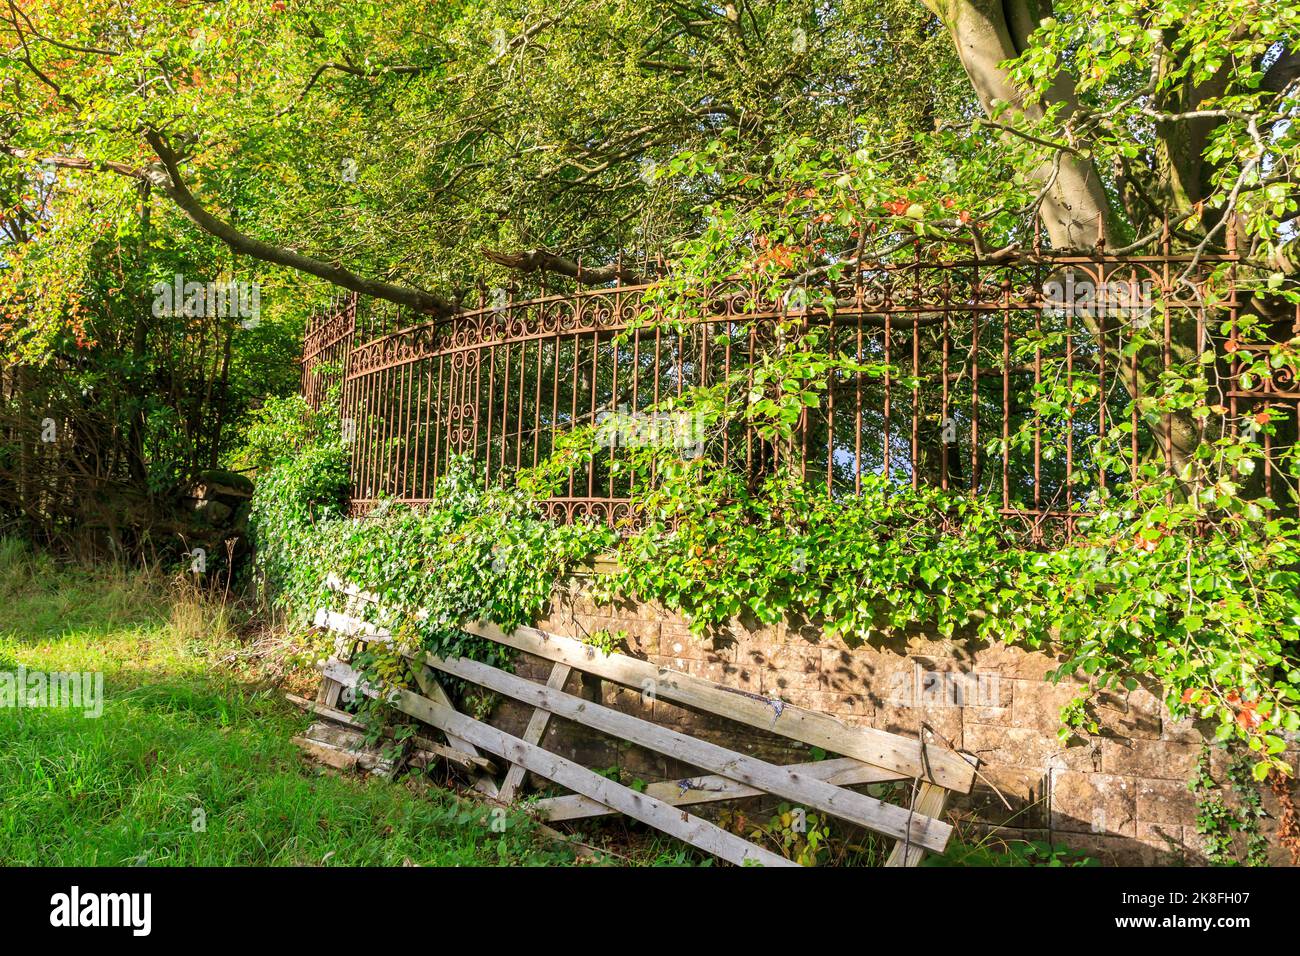 Old rusty wrought iron fence overgrown with Ivy and trees lit by evening sun Stock Photo